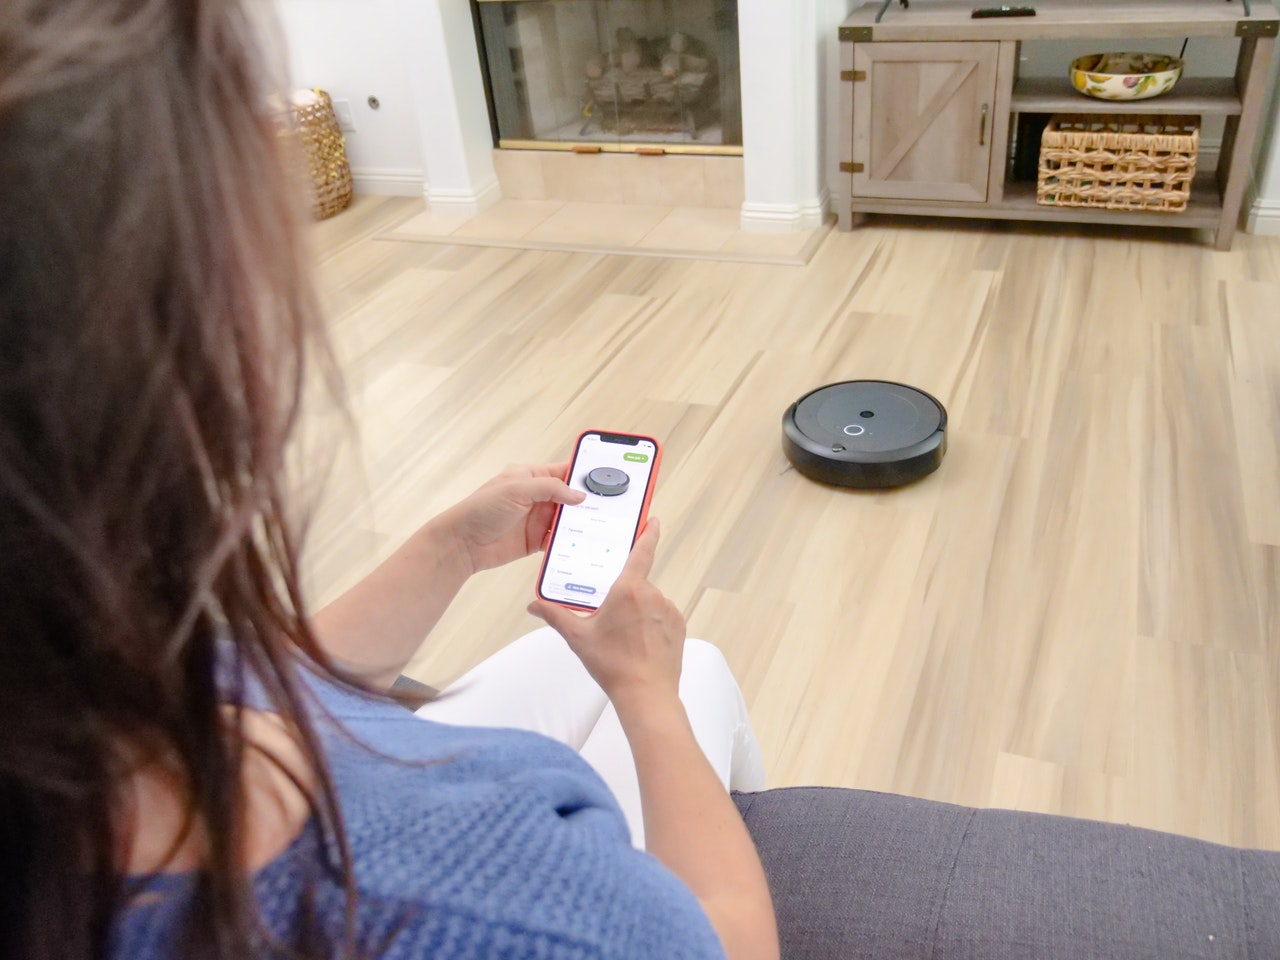 iRobot cleans, you work! See what the cleaning robot can do